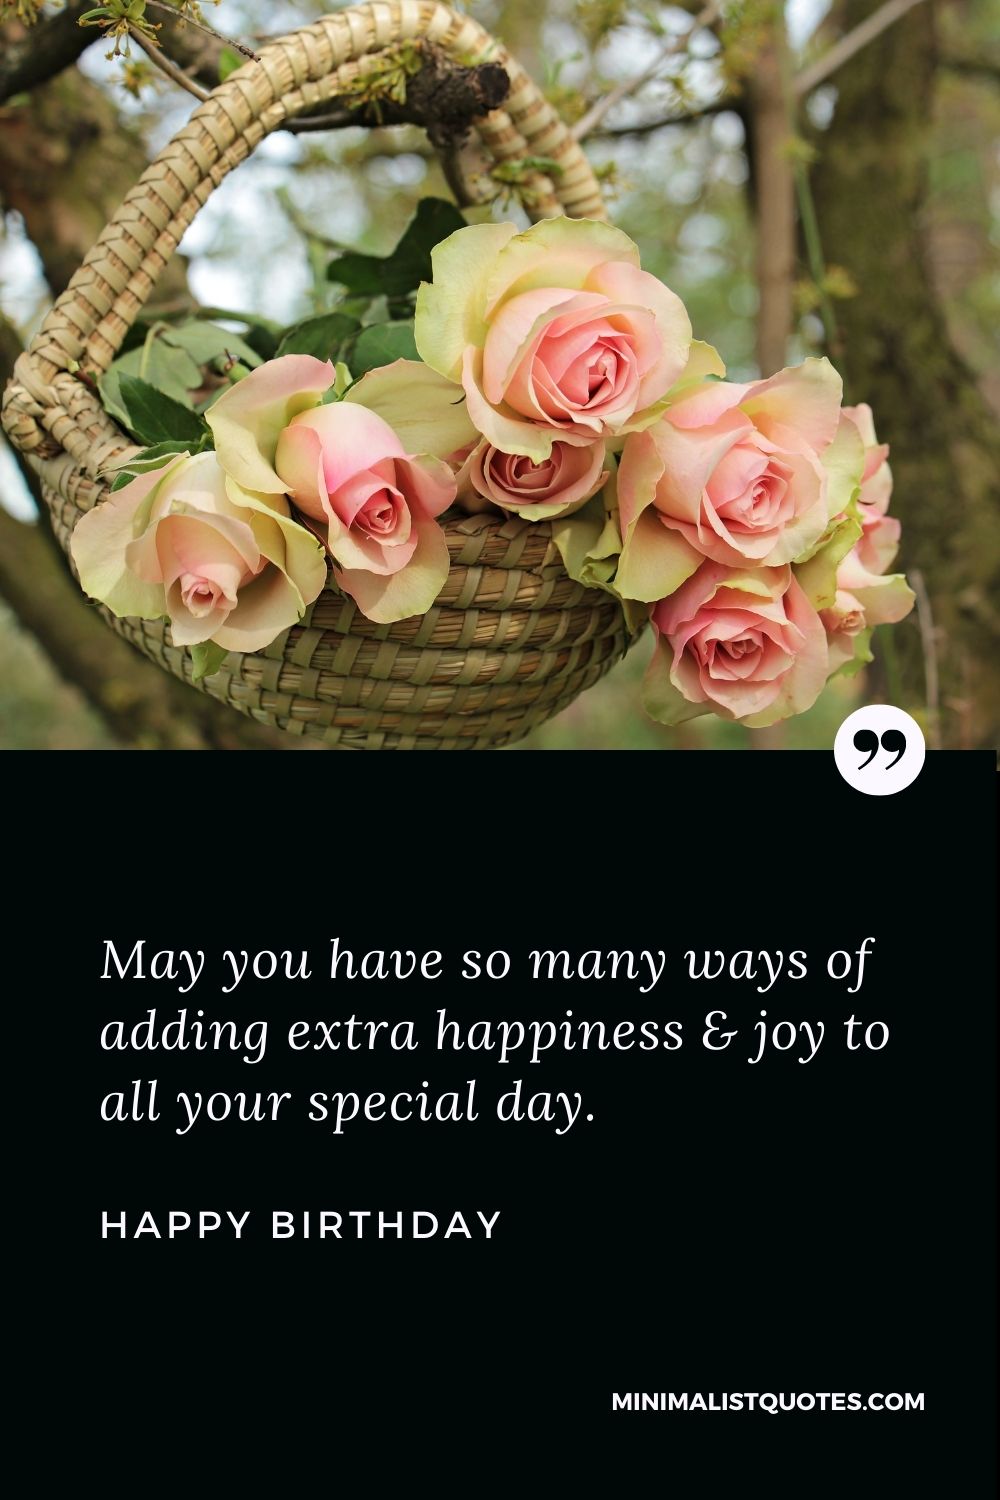 Happy Birthday Wish - May you have so many ways of adding extra happiness & joy to all your special day.